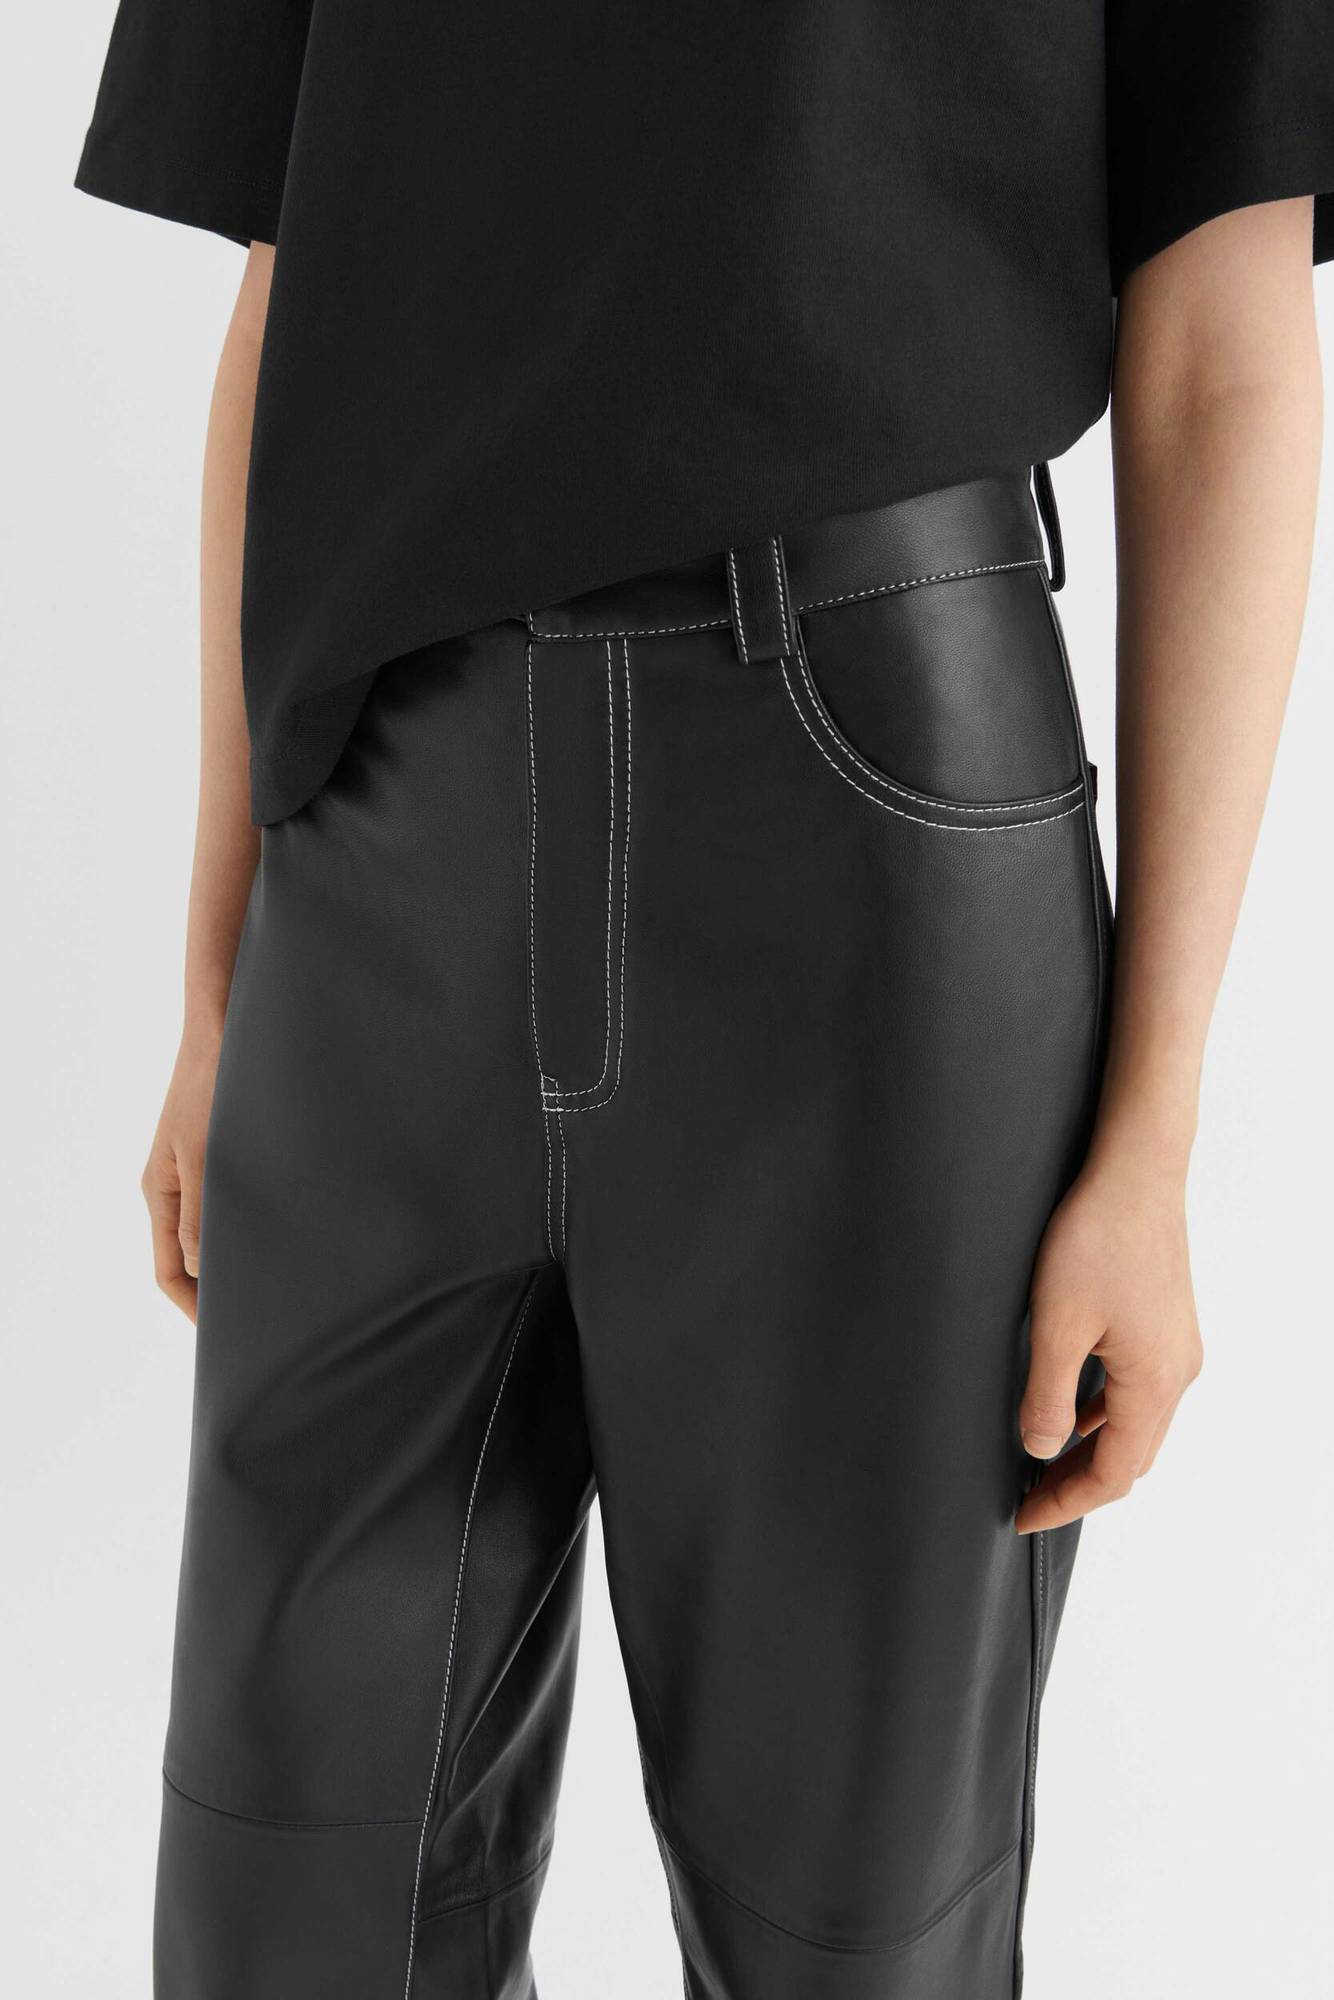 AXEL ARIGATO - Spencer Leather Trousers